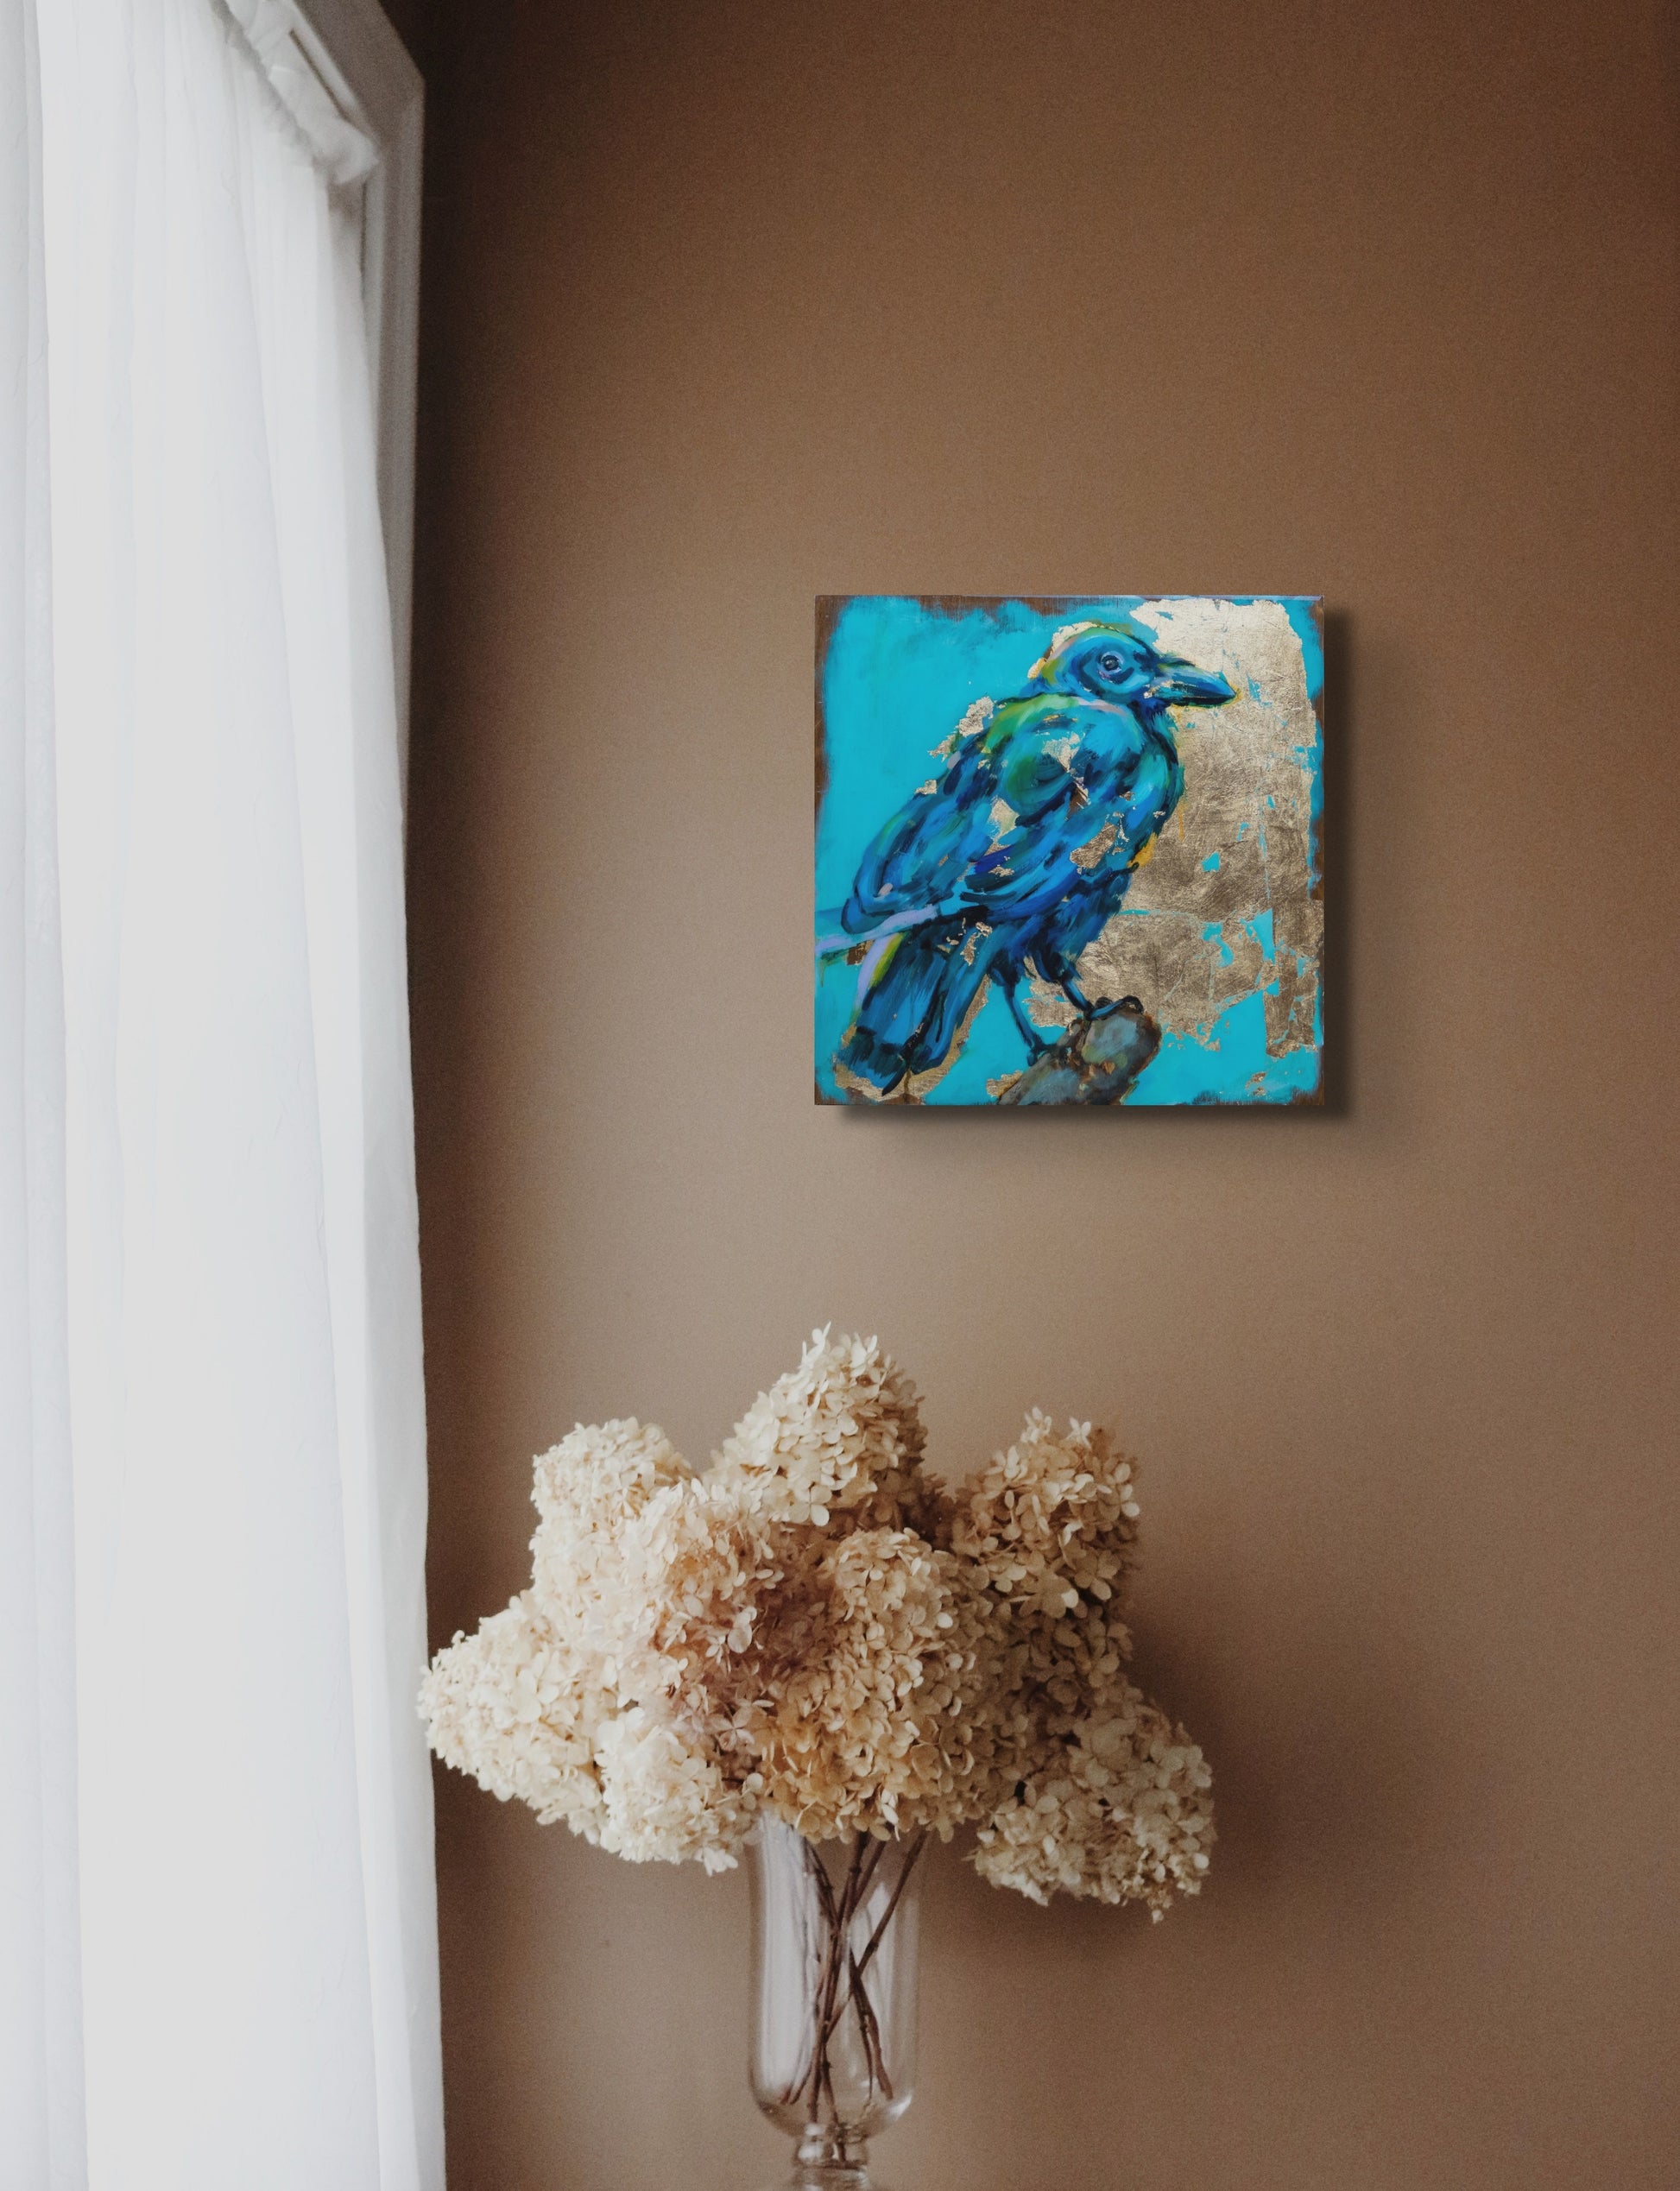 14"x14" painting of Raven using mixed media; acrylic and oil, pencil, and gold leaf with glossy resin finish on surface; shades of blue and gold; artist Shaney Watters; in situ